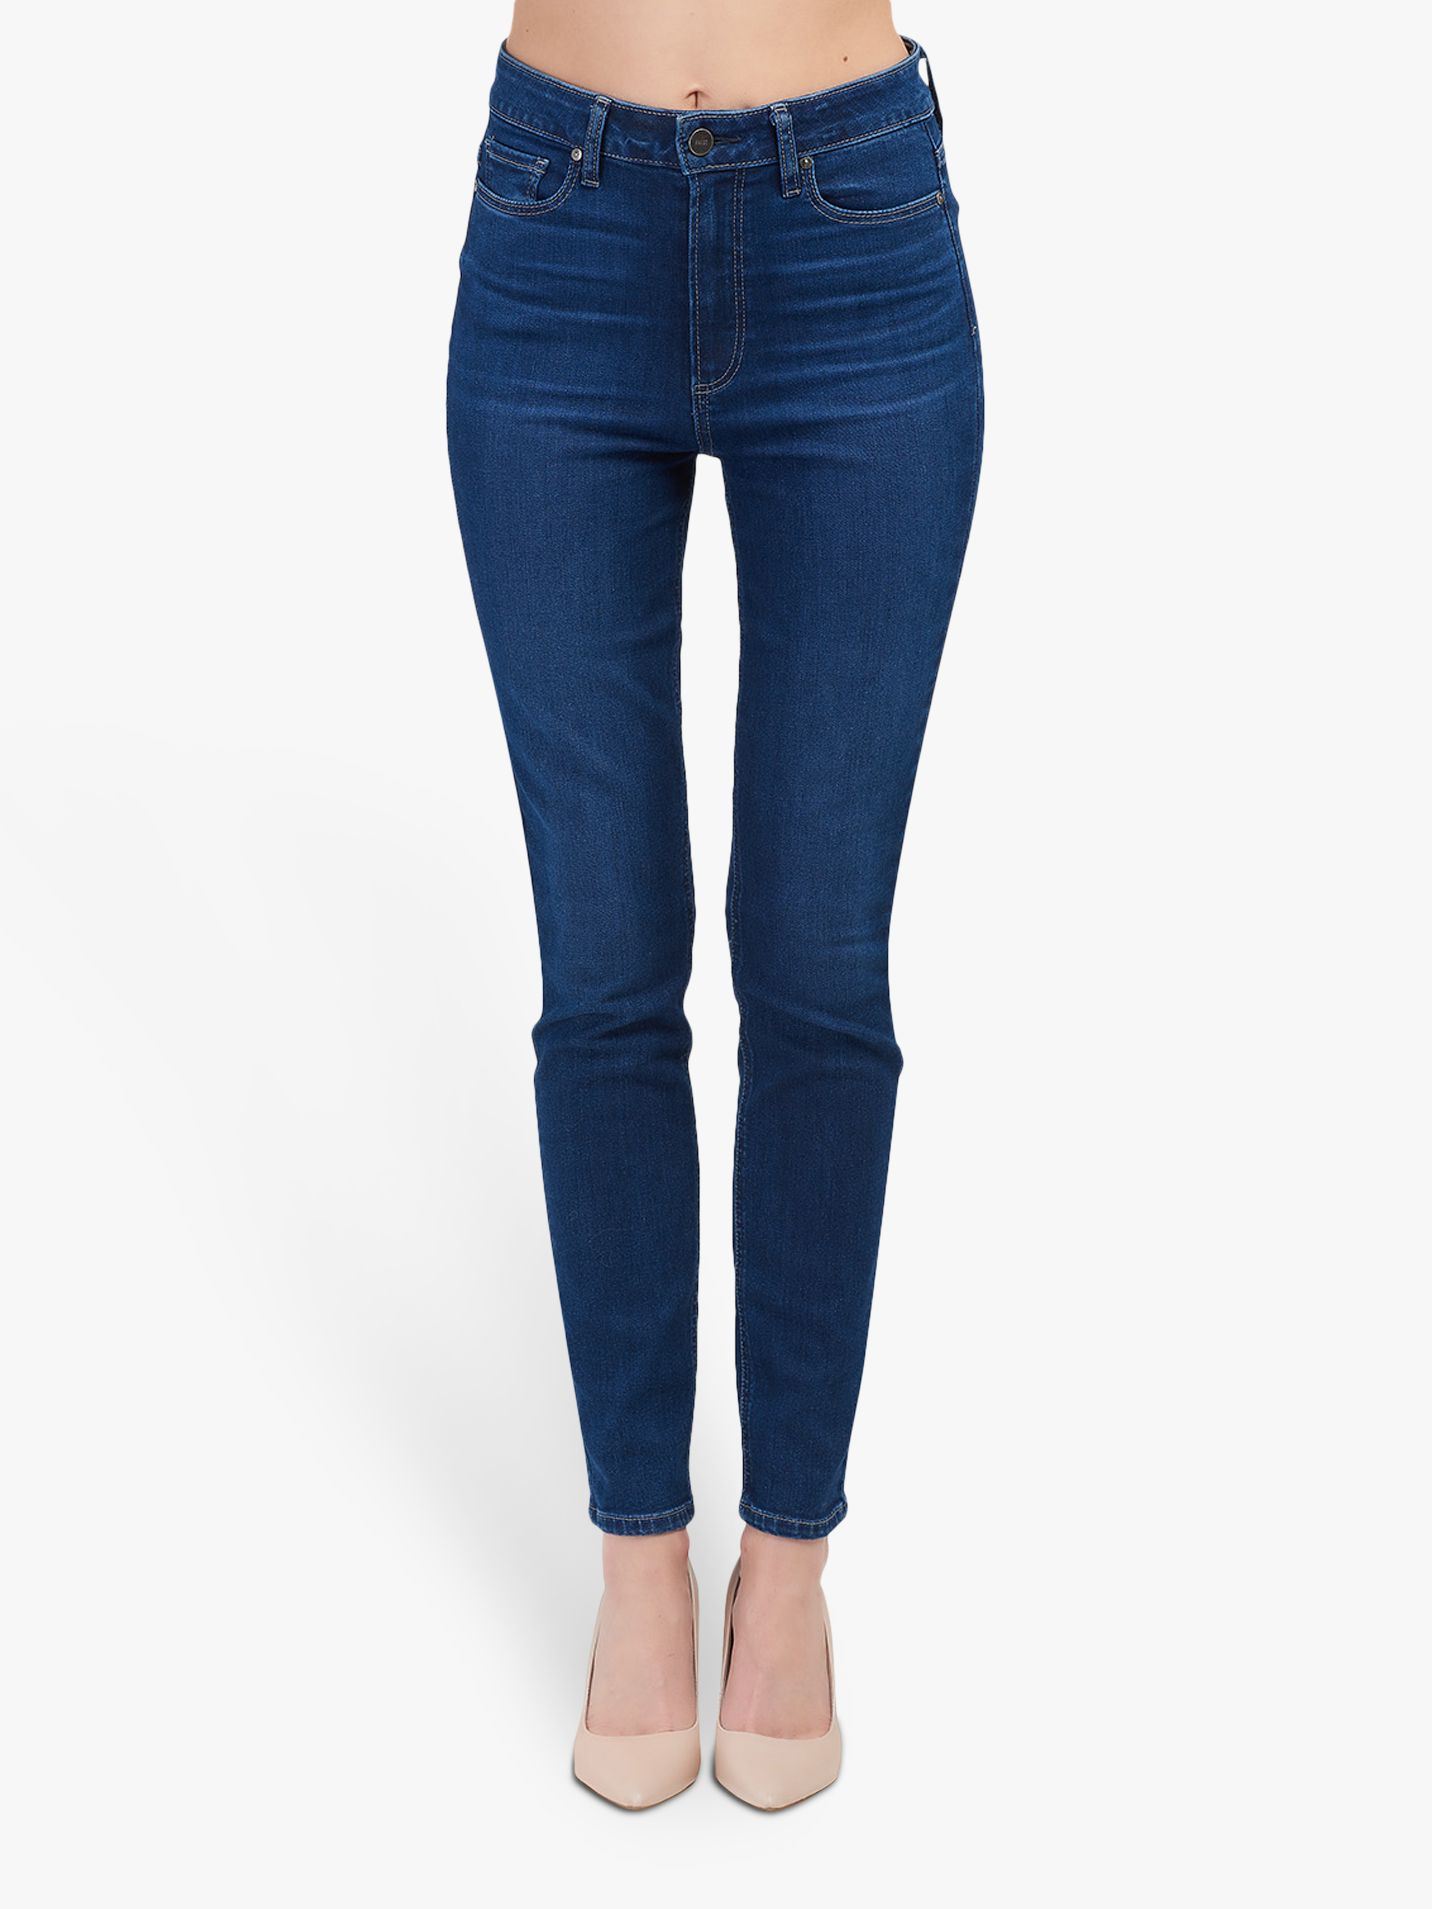 PAIGE Margot High Rise Ultra Skinny Jeans, Brentwood Mid Wash, 24